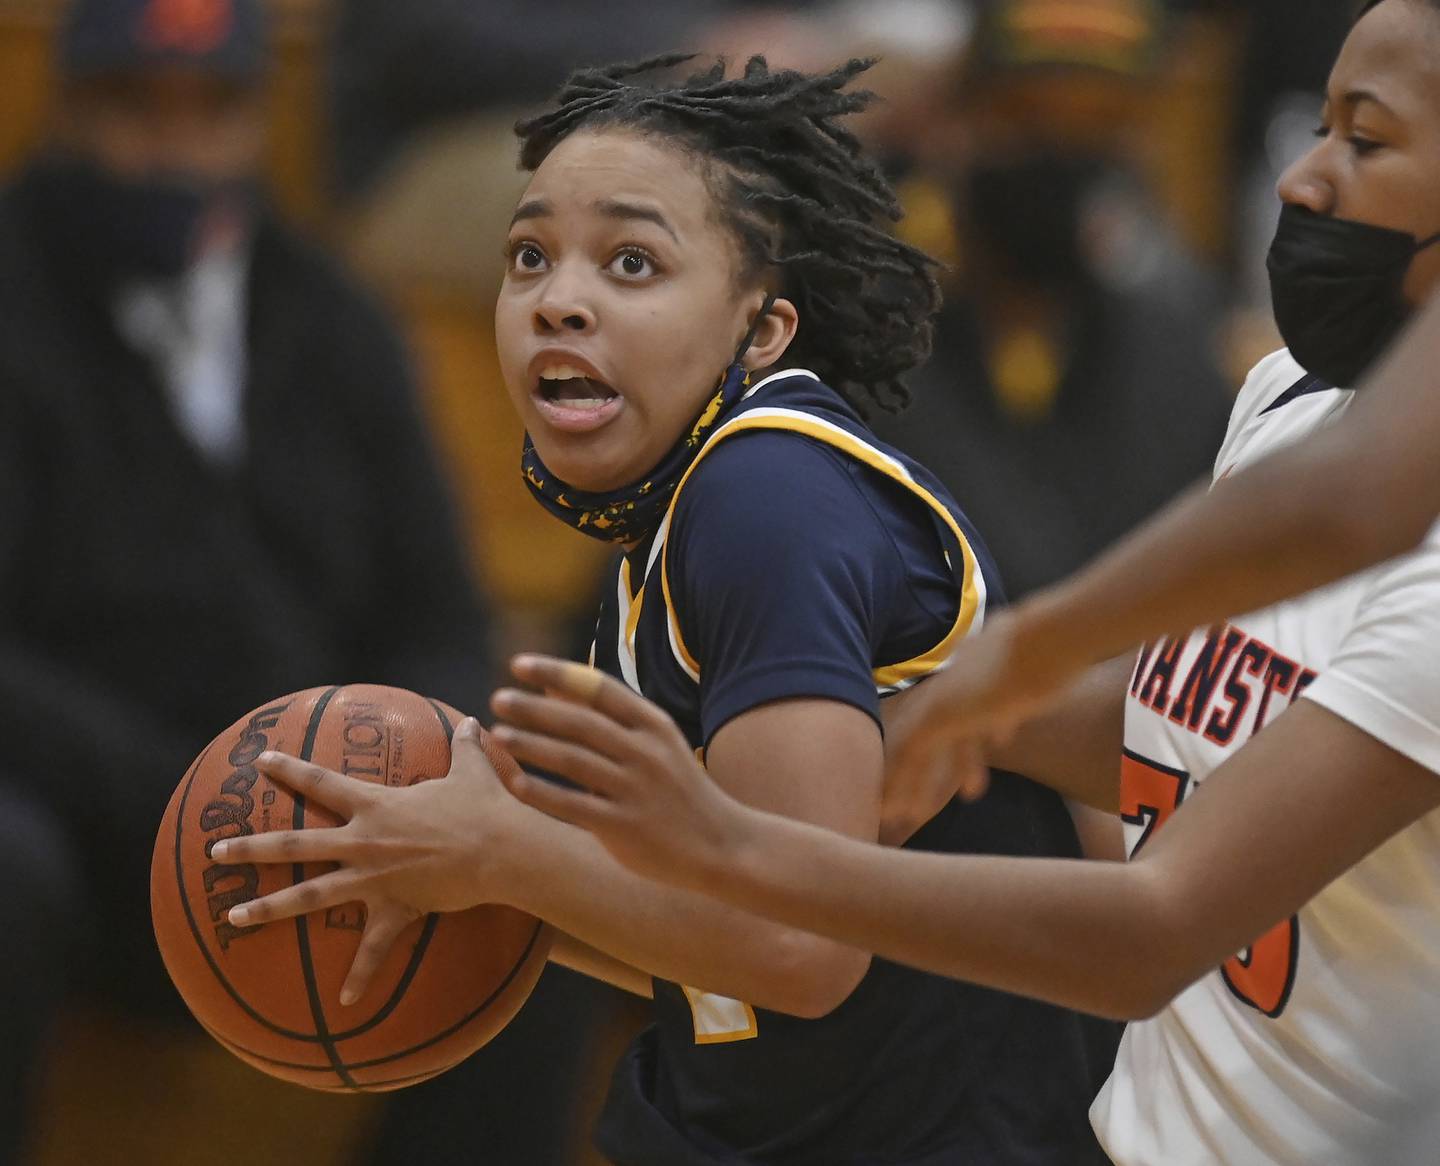 Thornwood's Janiyah Saverson (2) looks to drive against Evanston during a game on Jan. 17, 2022.